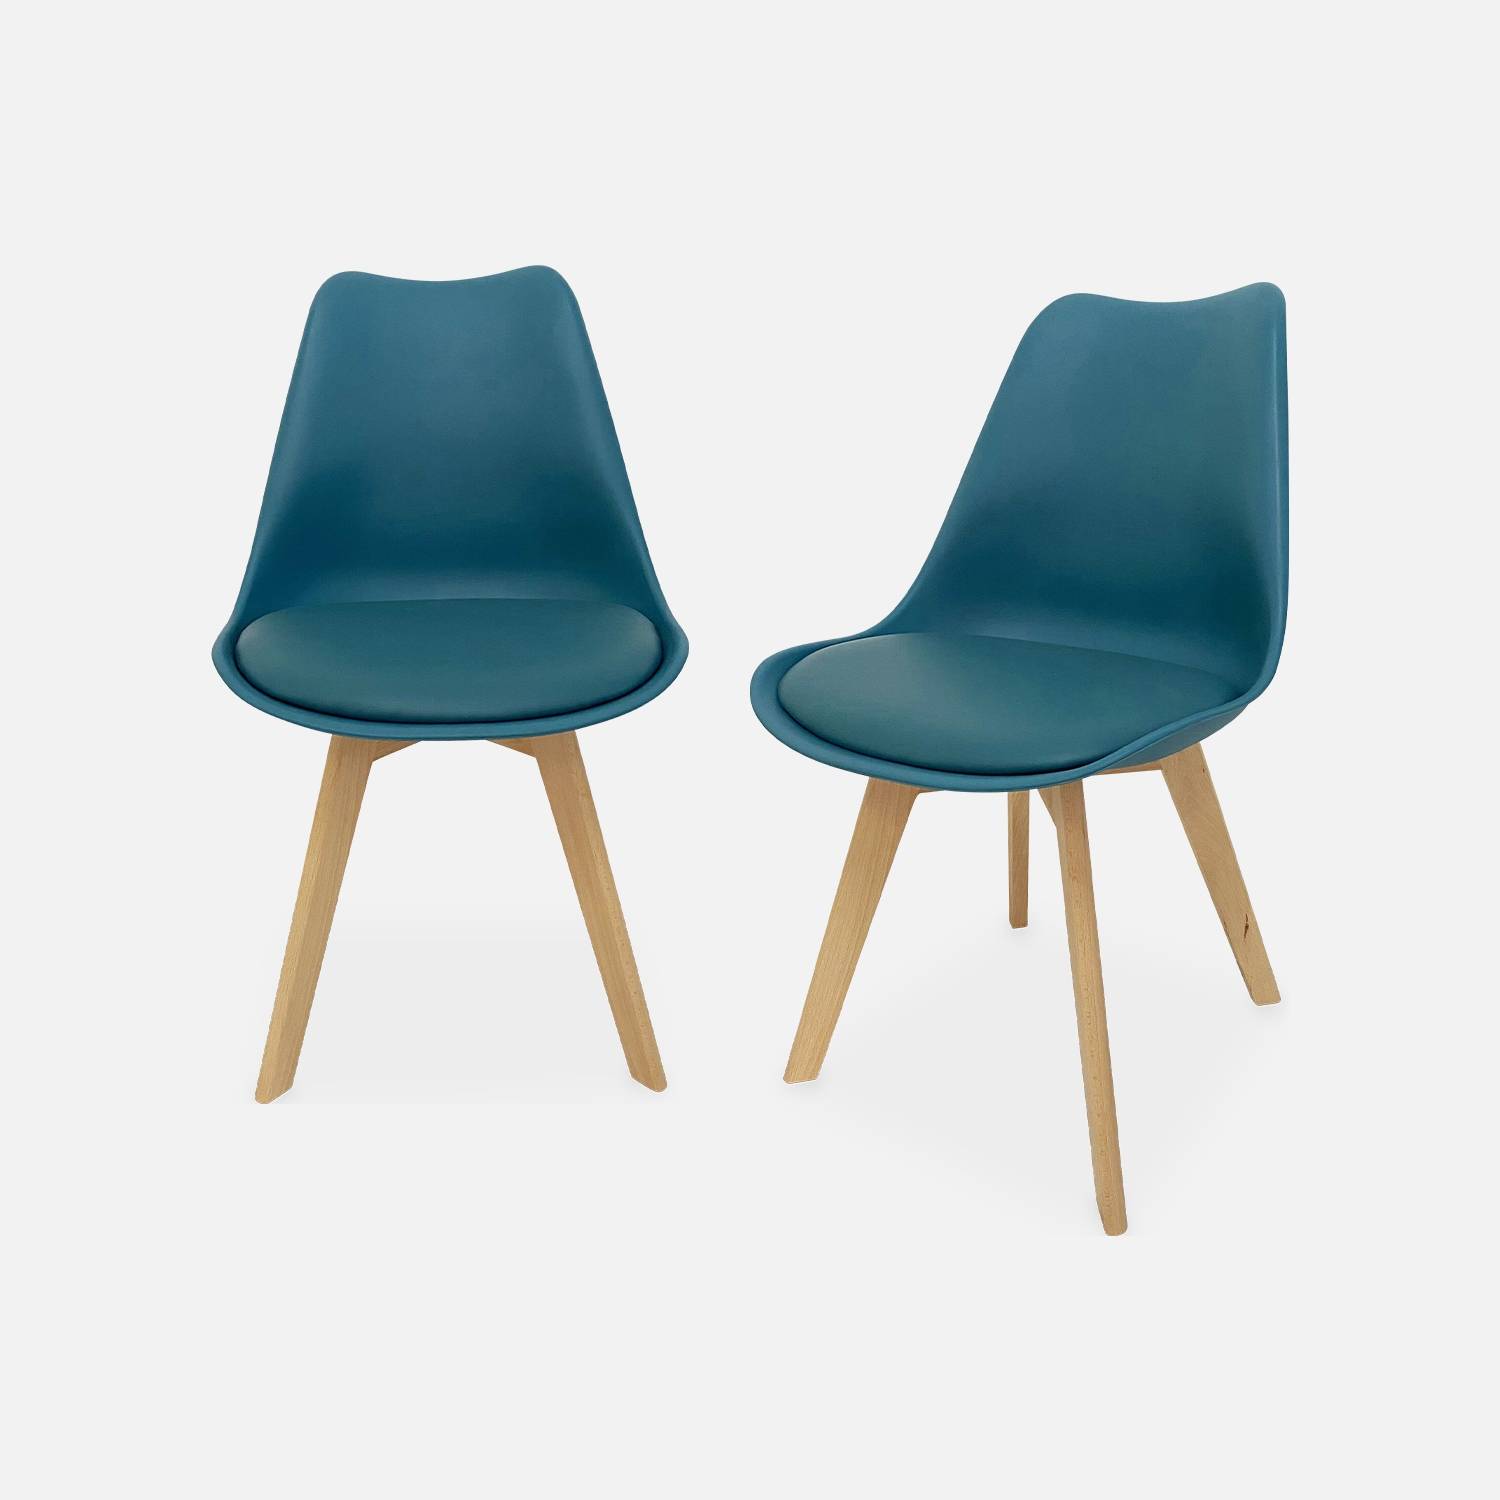 Pair of scandi-style faux-leather dining chair | sweeek